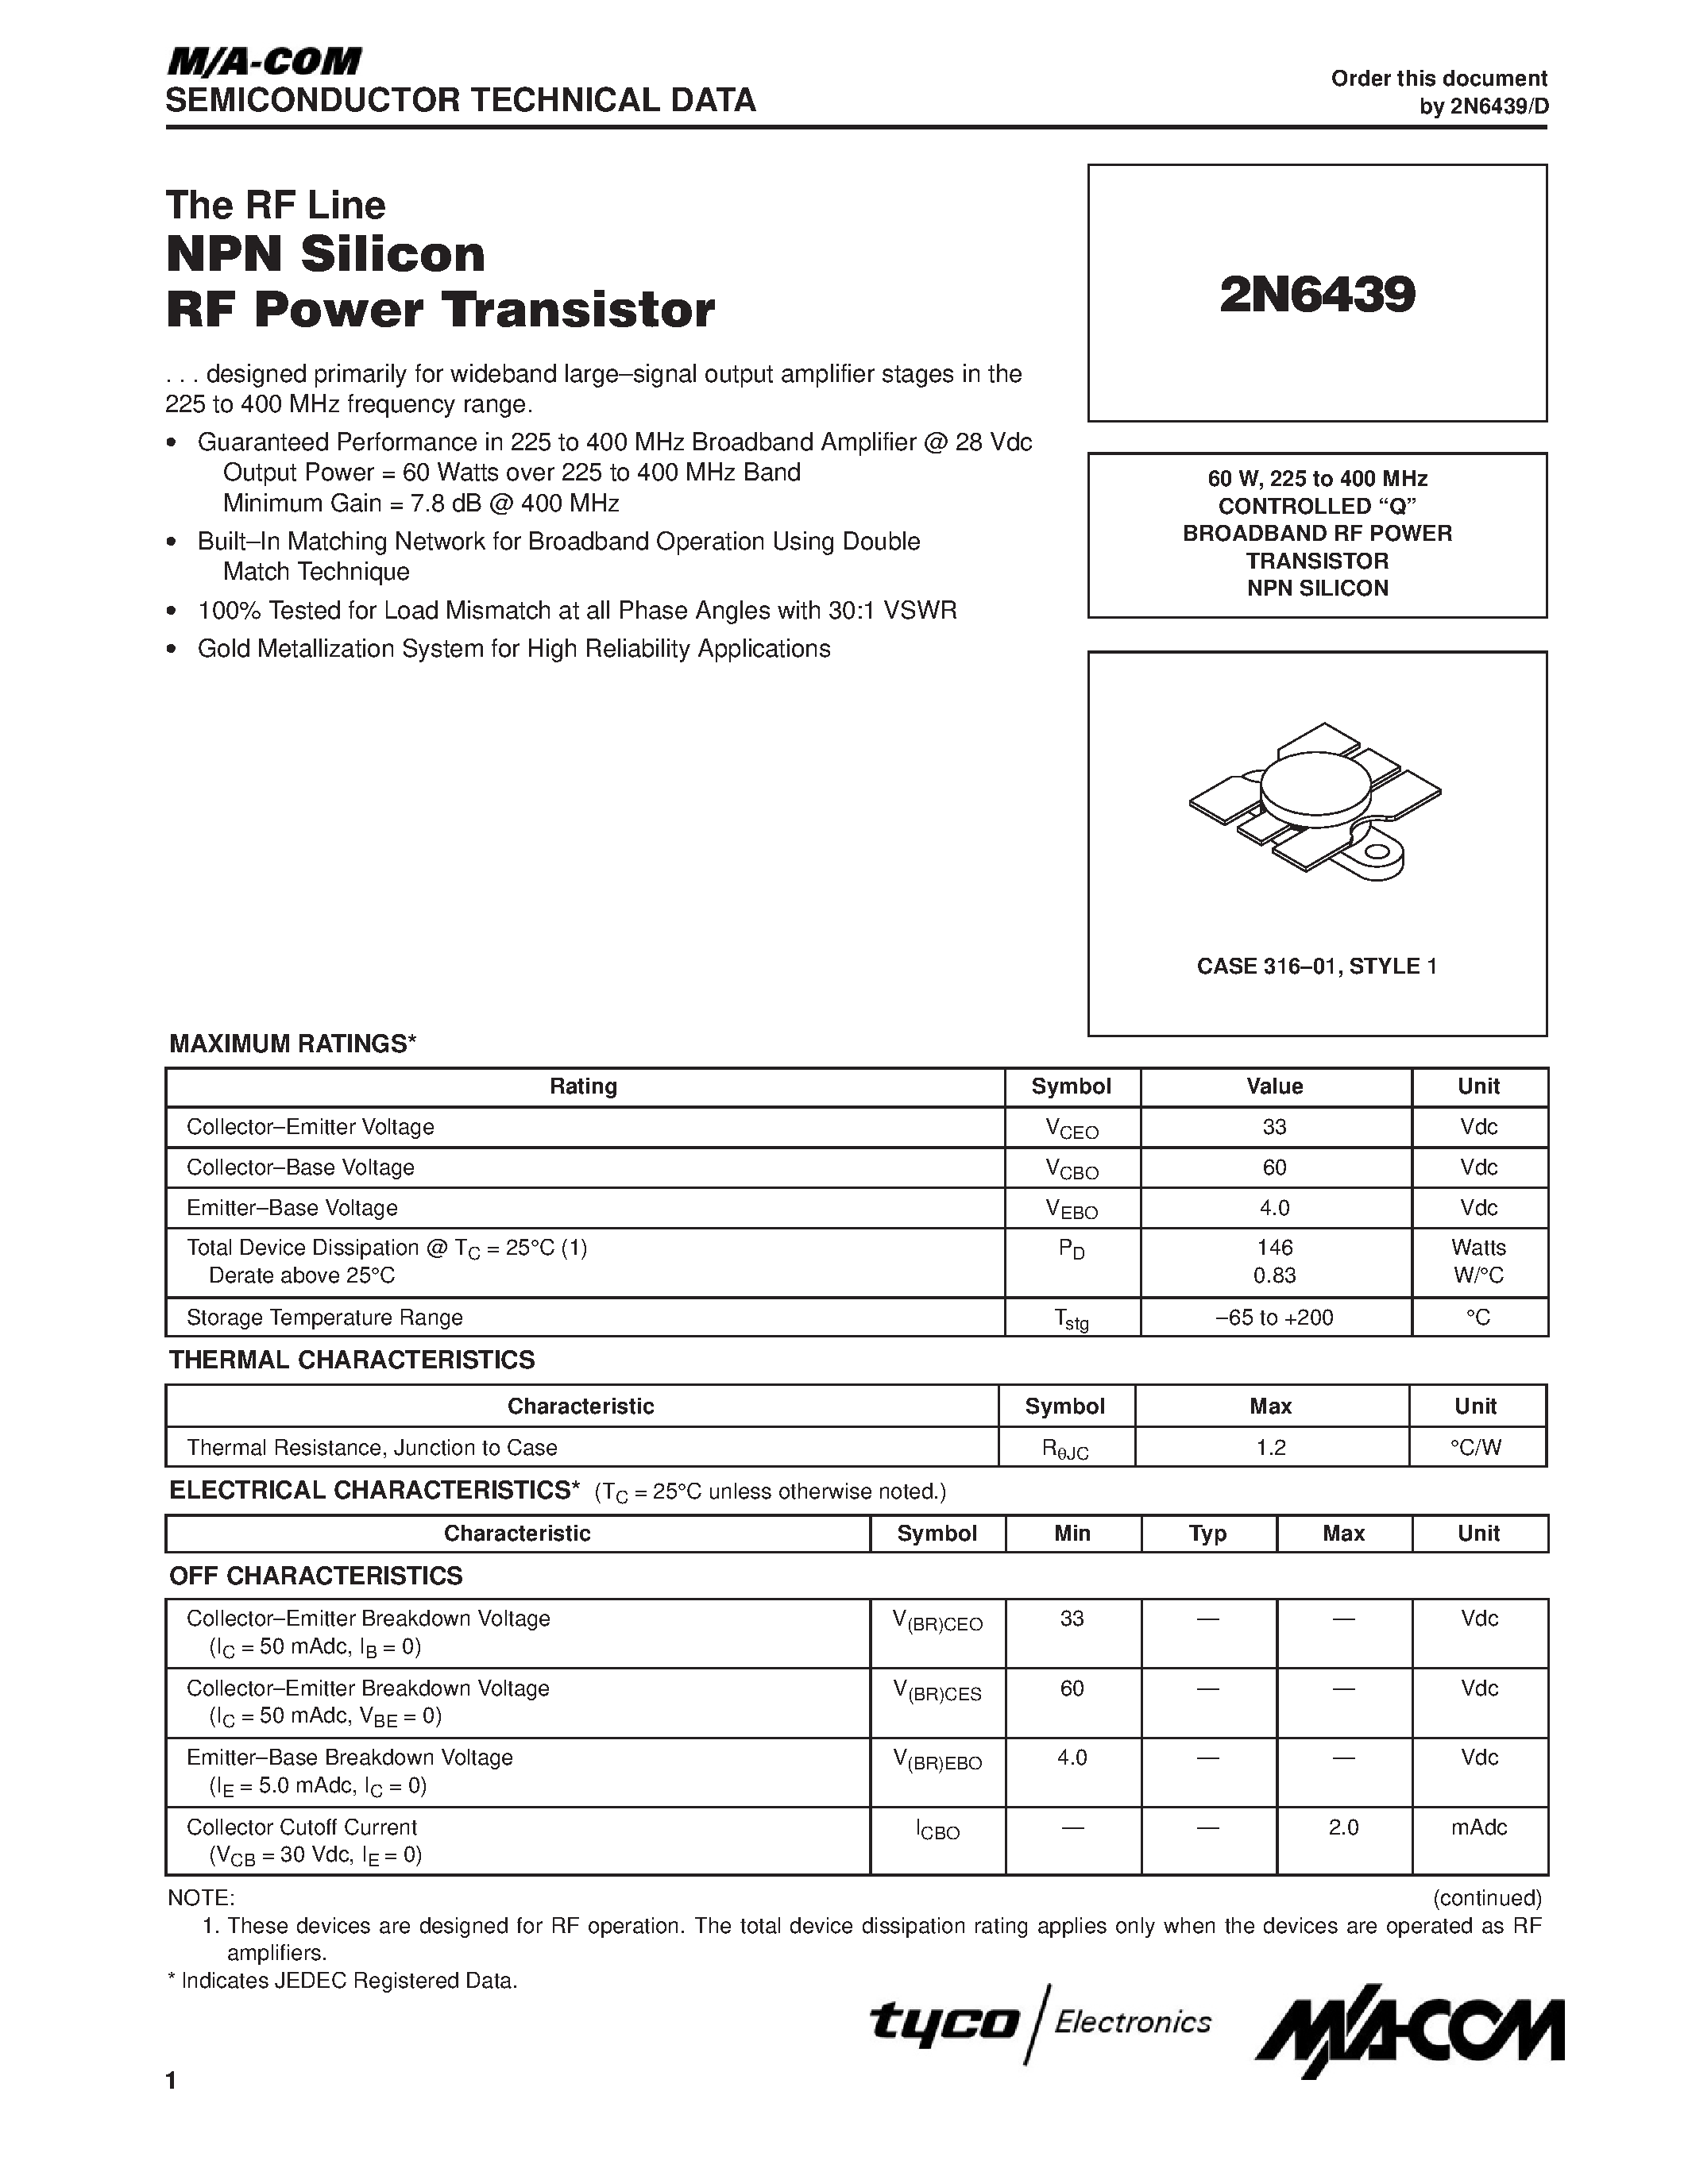 Даташит M306N0FGTFP - 60 W / 225 to 400 MHz CONTROLLED Q BROADBAND RF POWER TRANSISTOR NPN SILICON страница 1